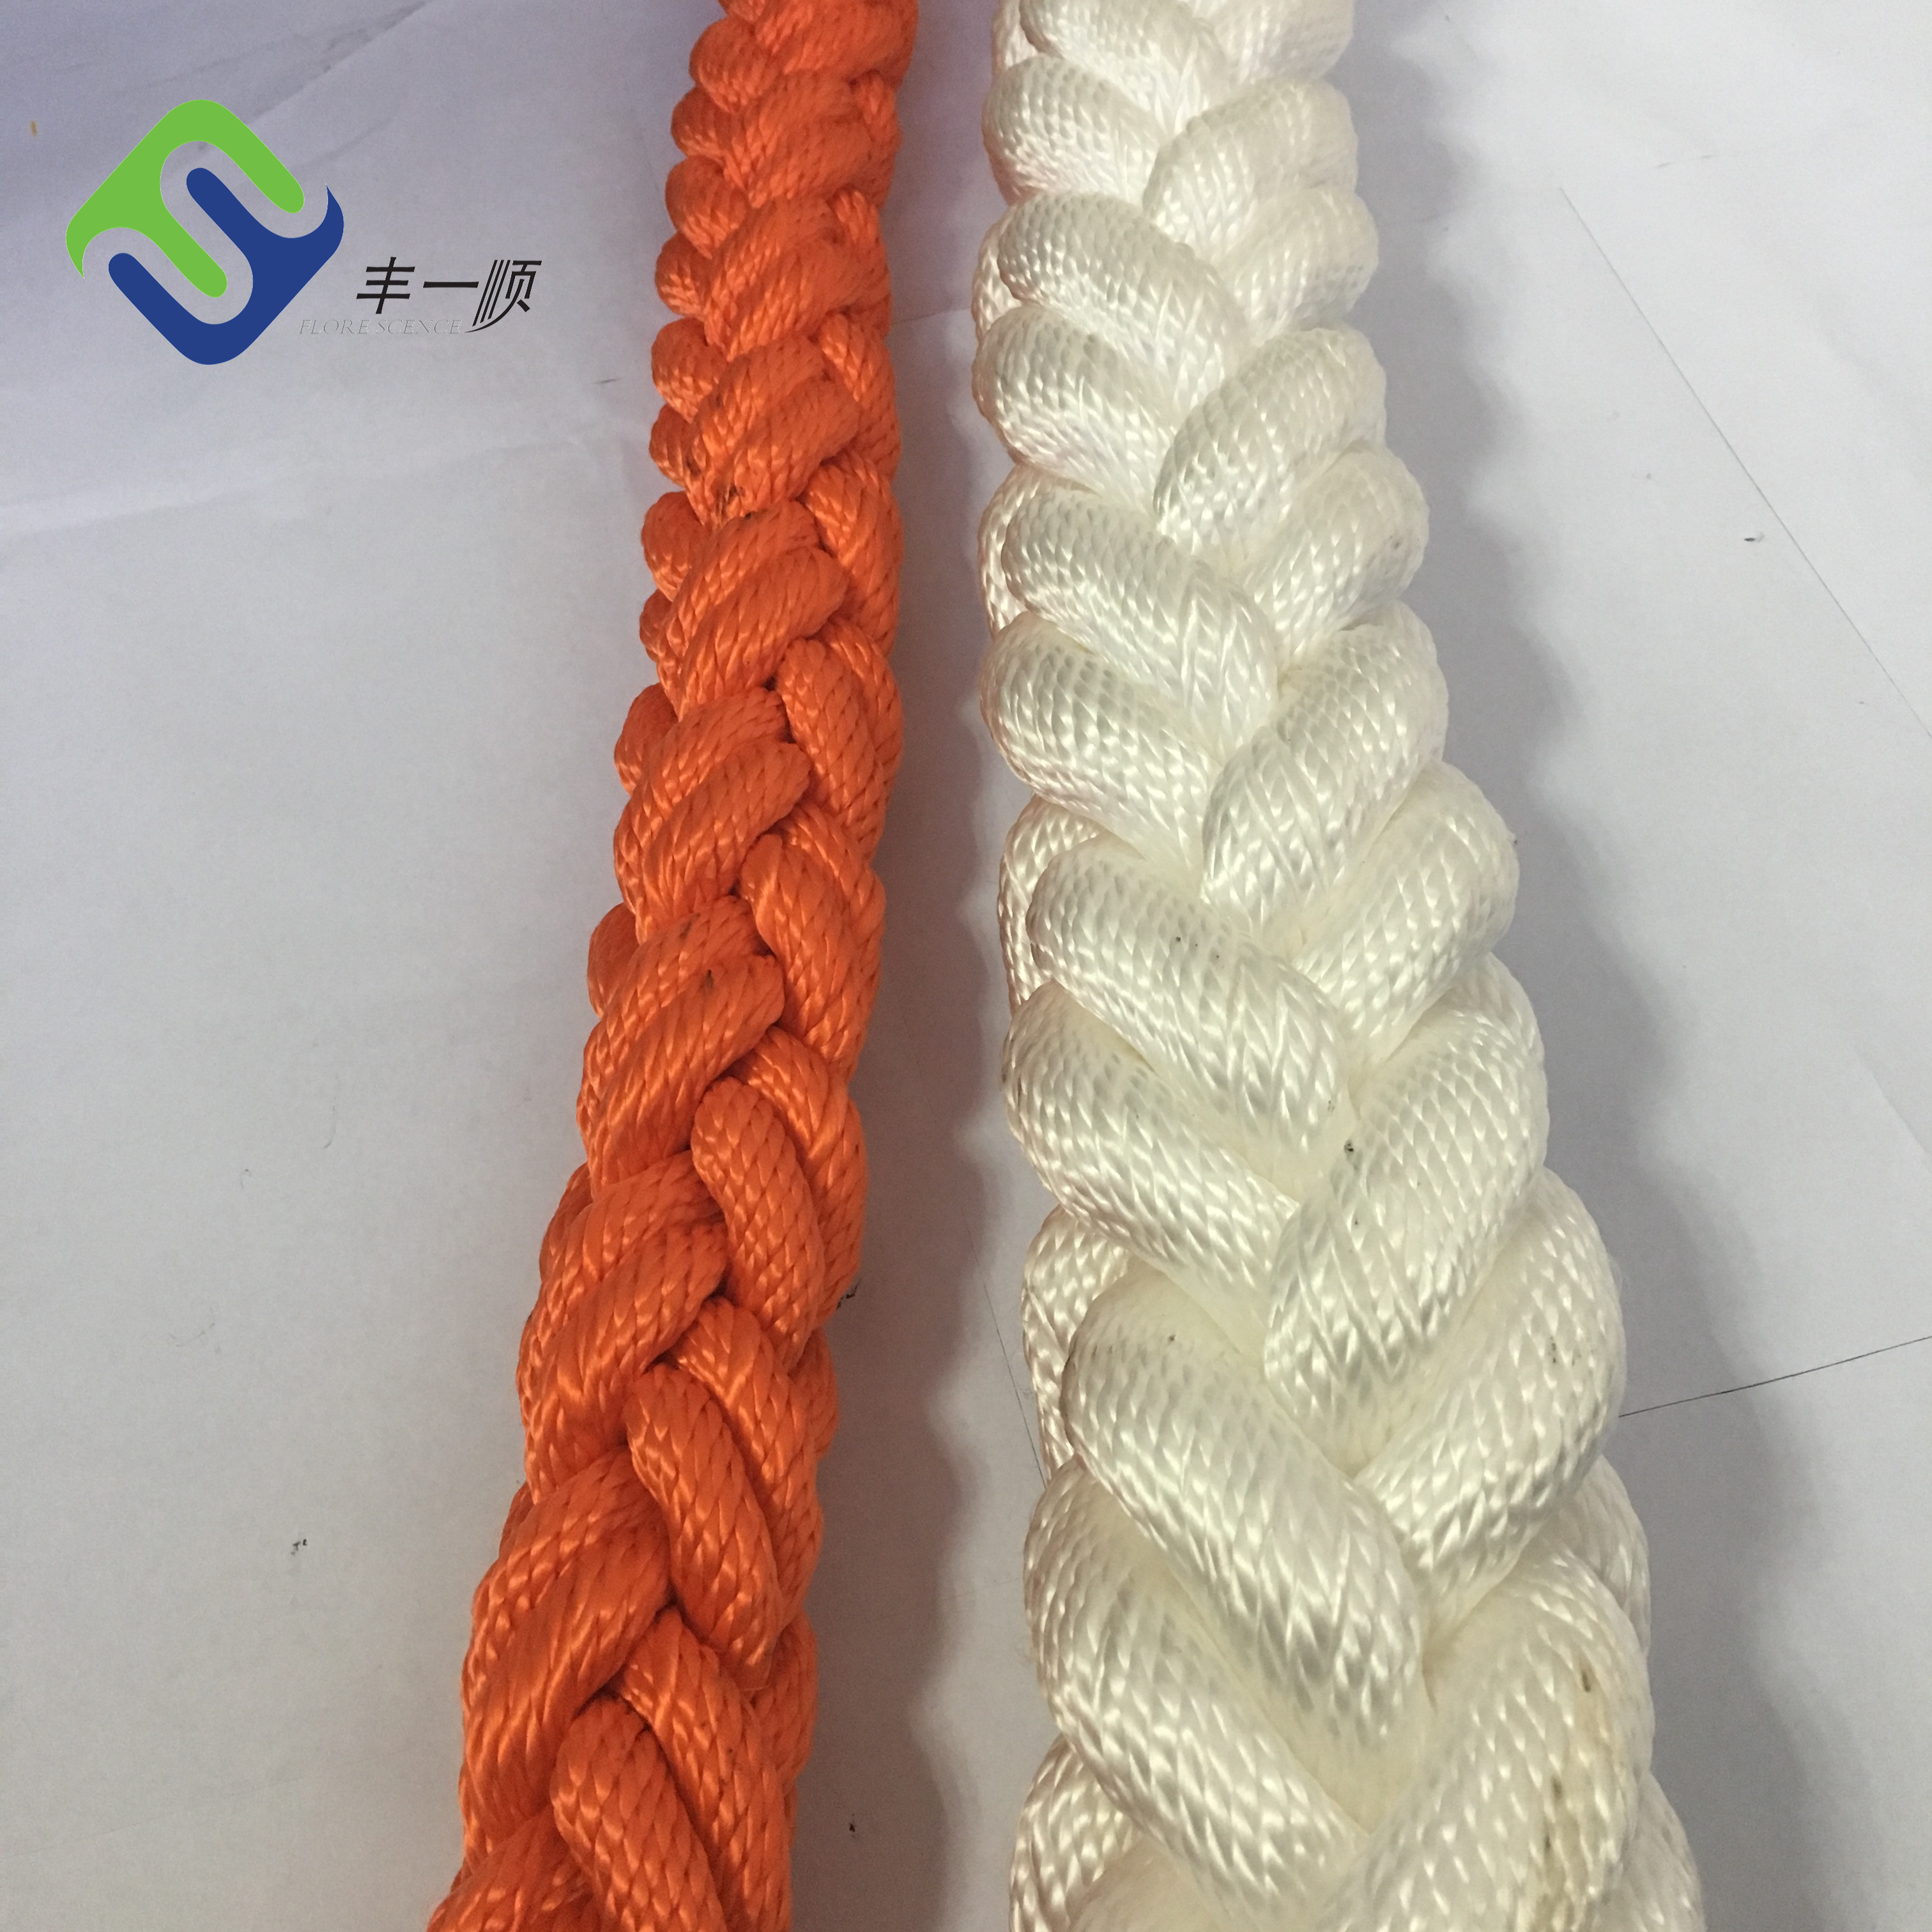 Quality Inspection for Kevlar Rope 3mm - Polyamide Nylon Marine Mooring 8 Strands Nylon Rope 56mmx220m With CCS – Florescence